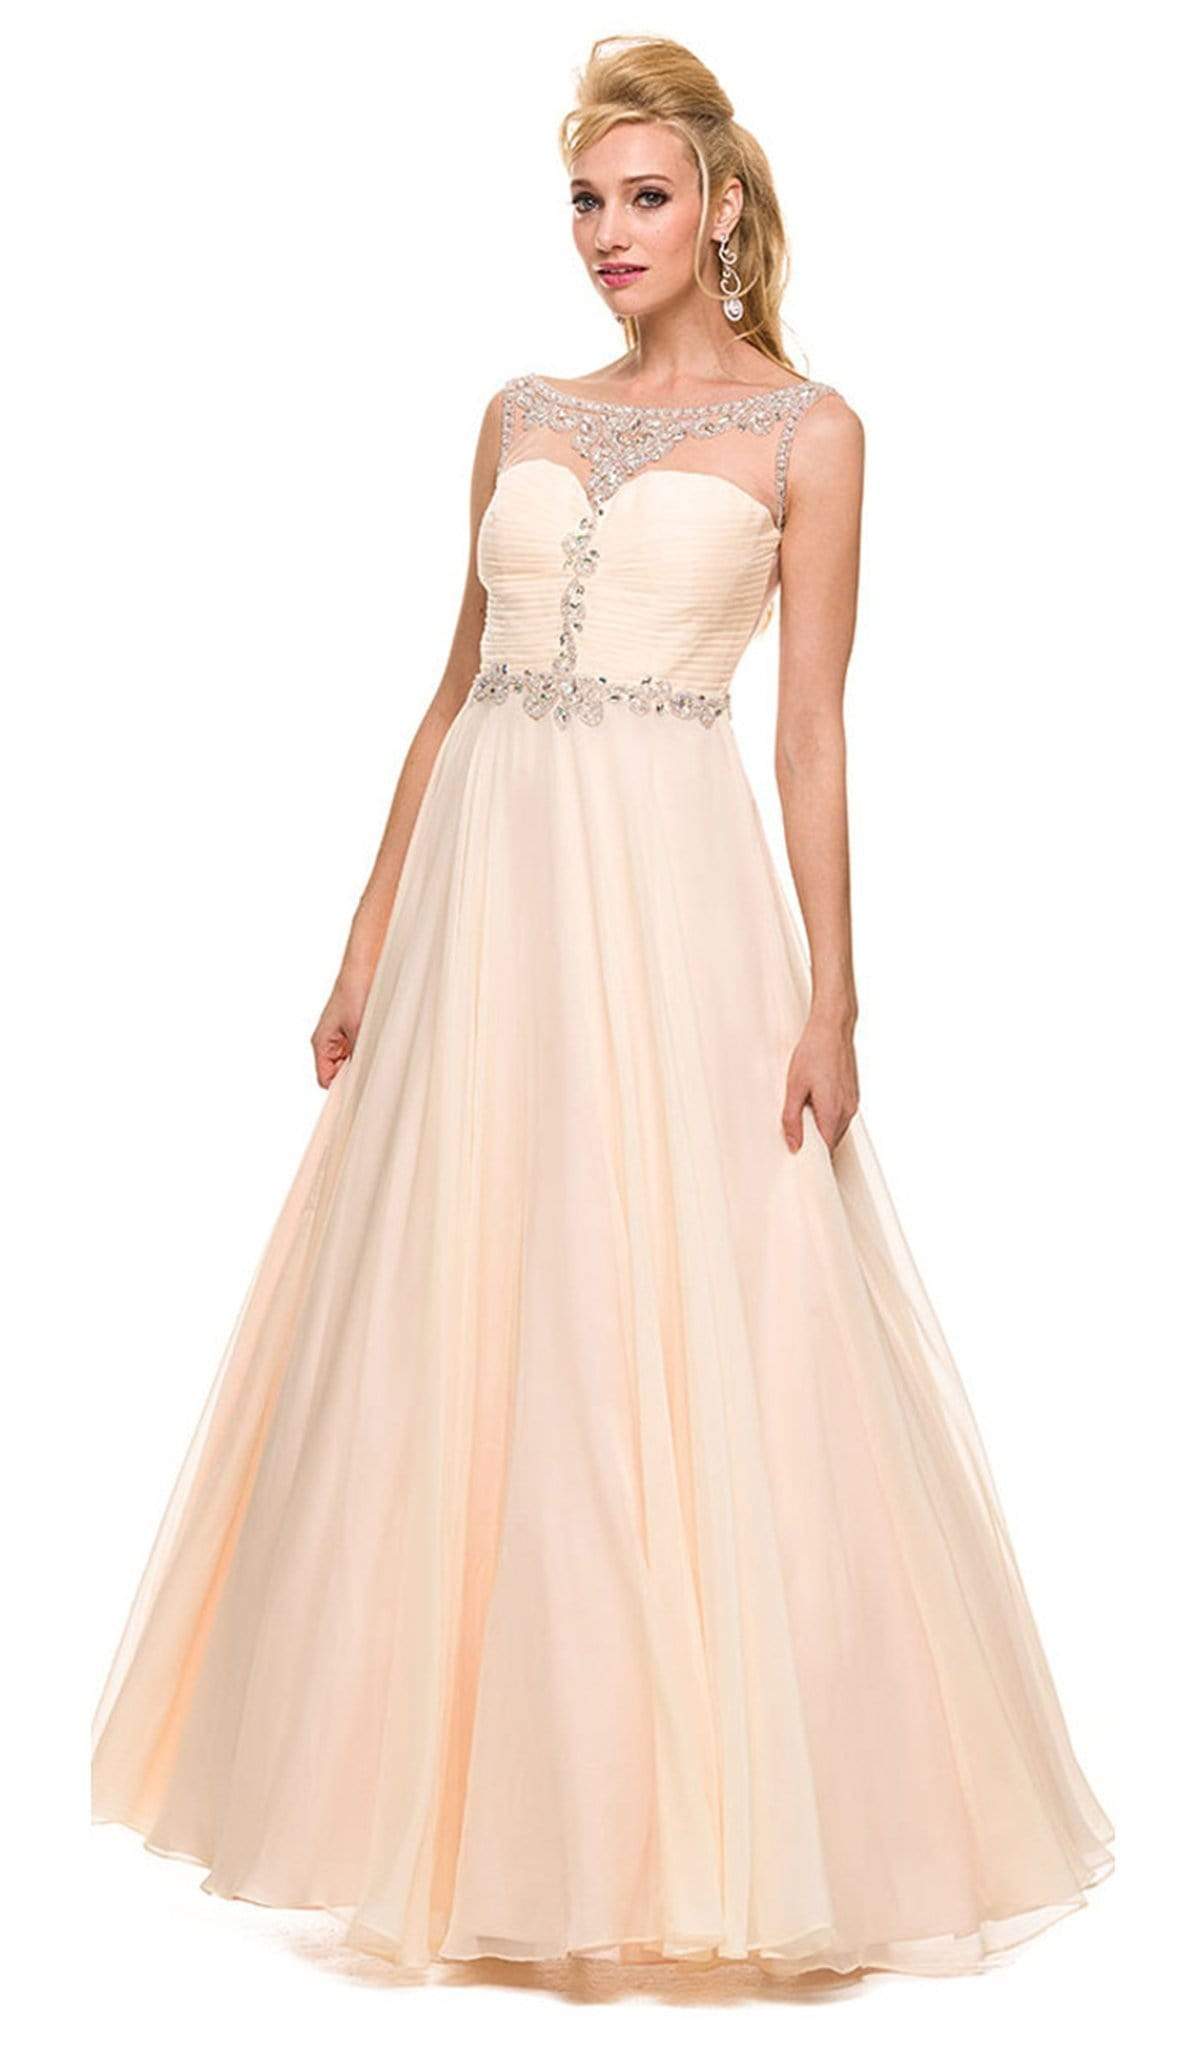 Nox Anabel - 8155 Bateau illusion Chiffon Gown Special Occasion Dress XS / Nude